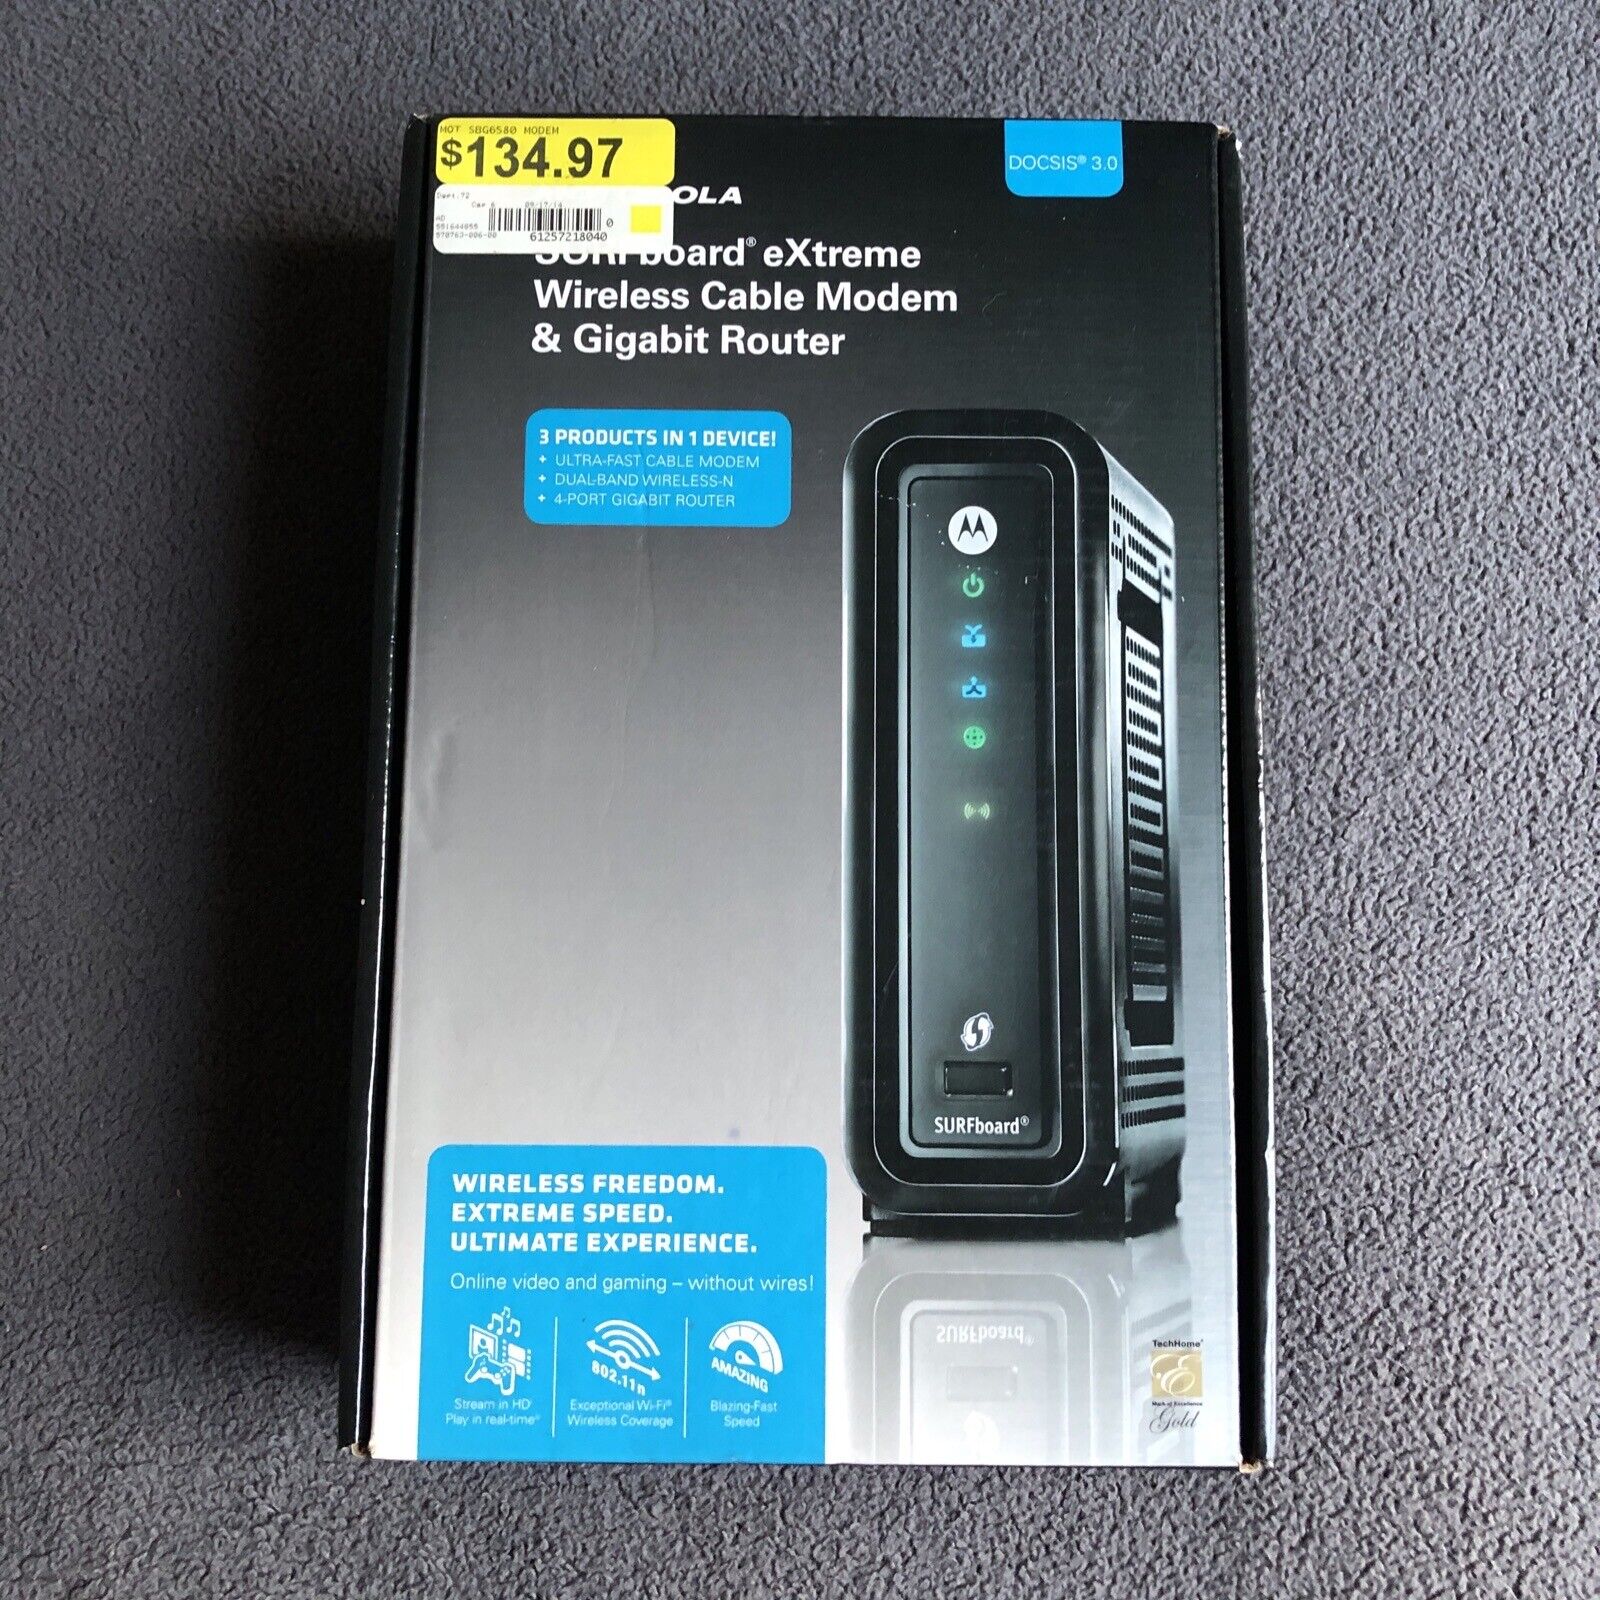 Motorola SBG6580 eXtreme Wireless Cable Modern And Gigabit Router - OPEN BOX